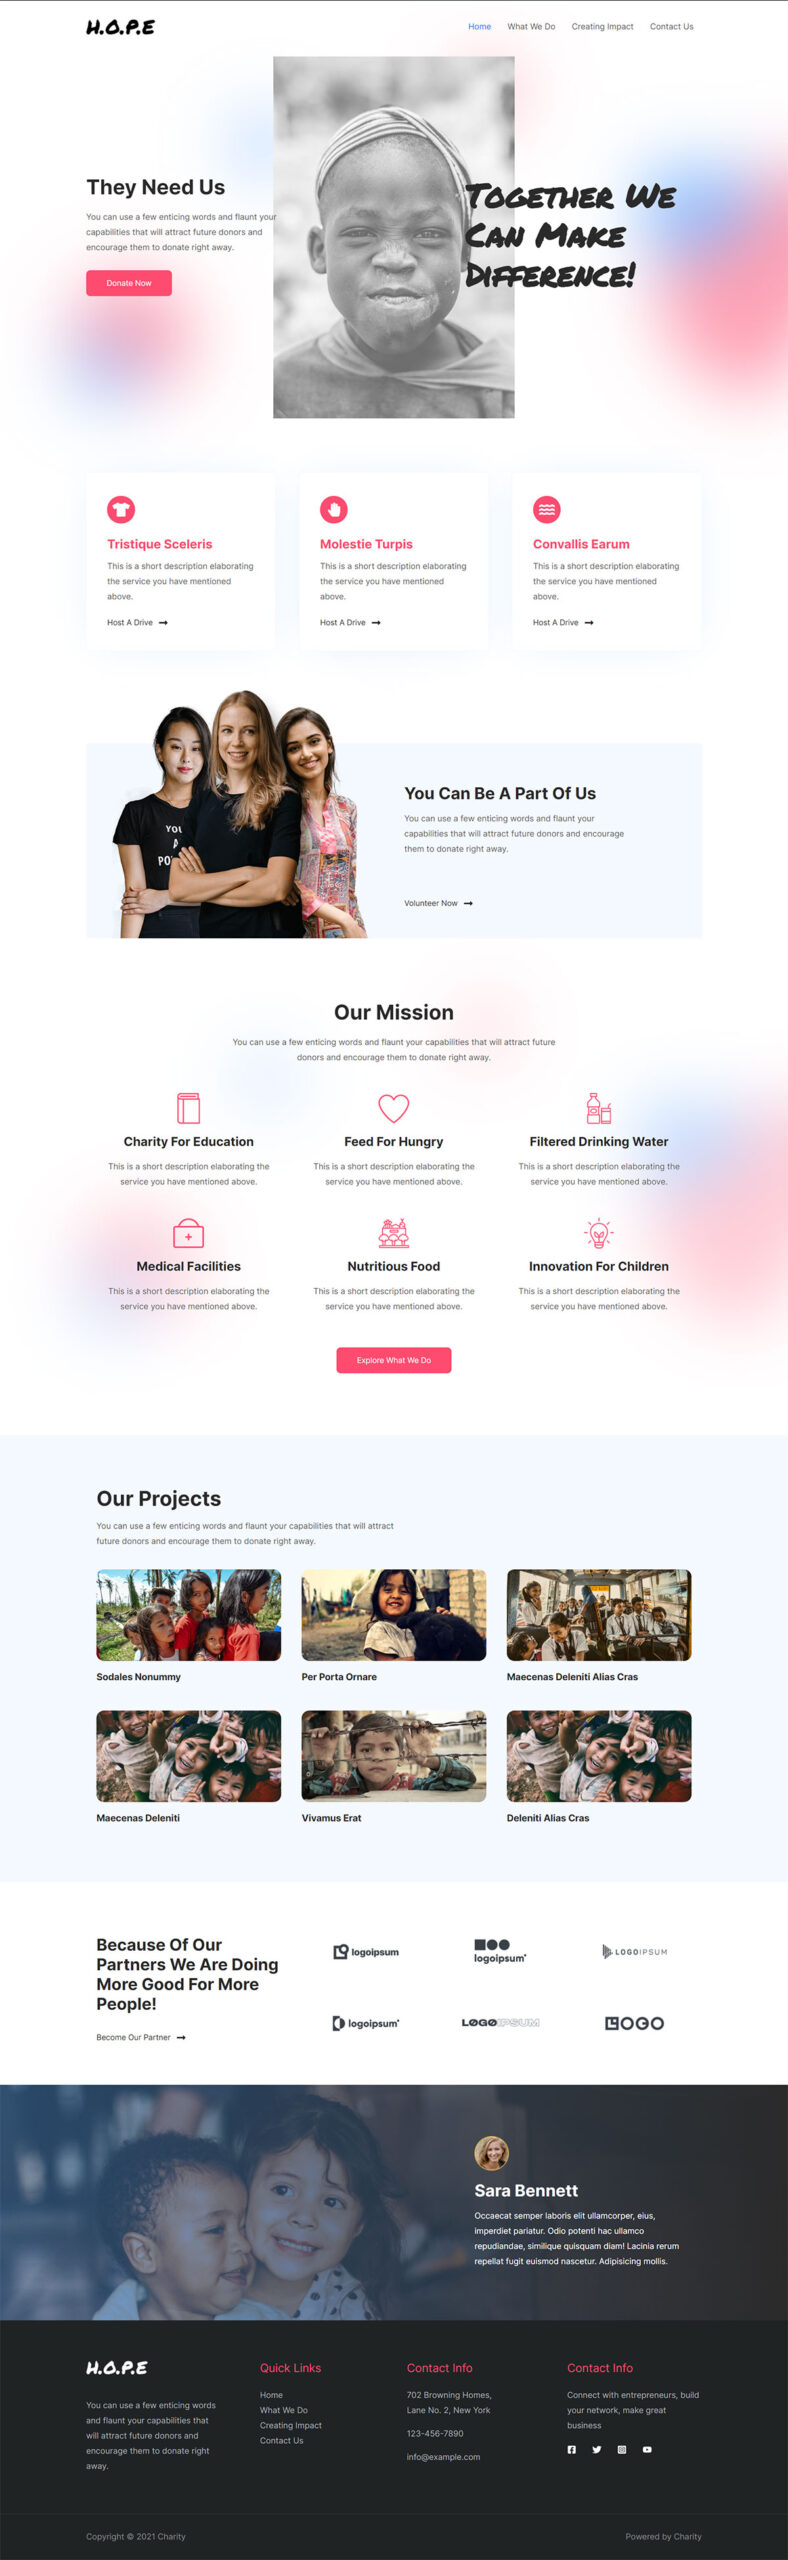 Charity home page